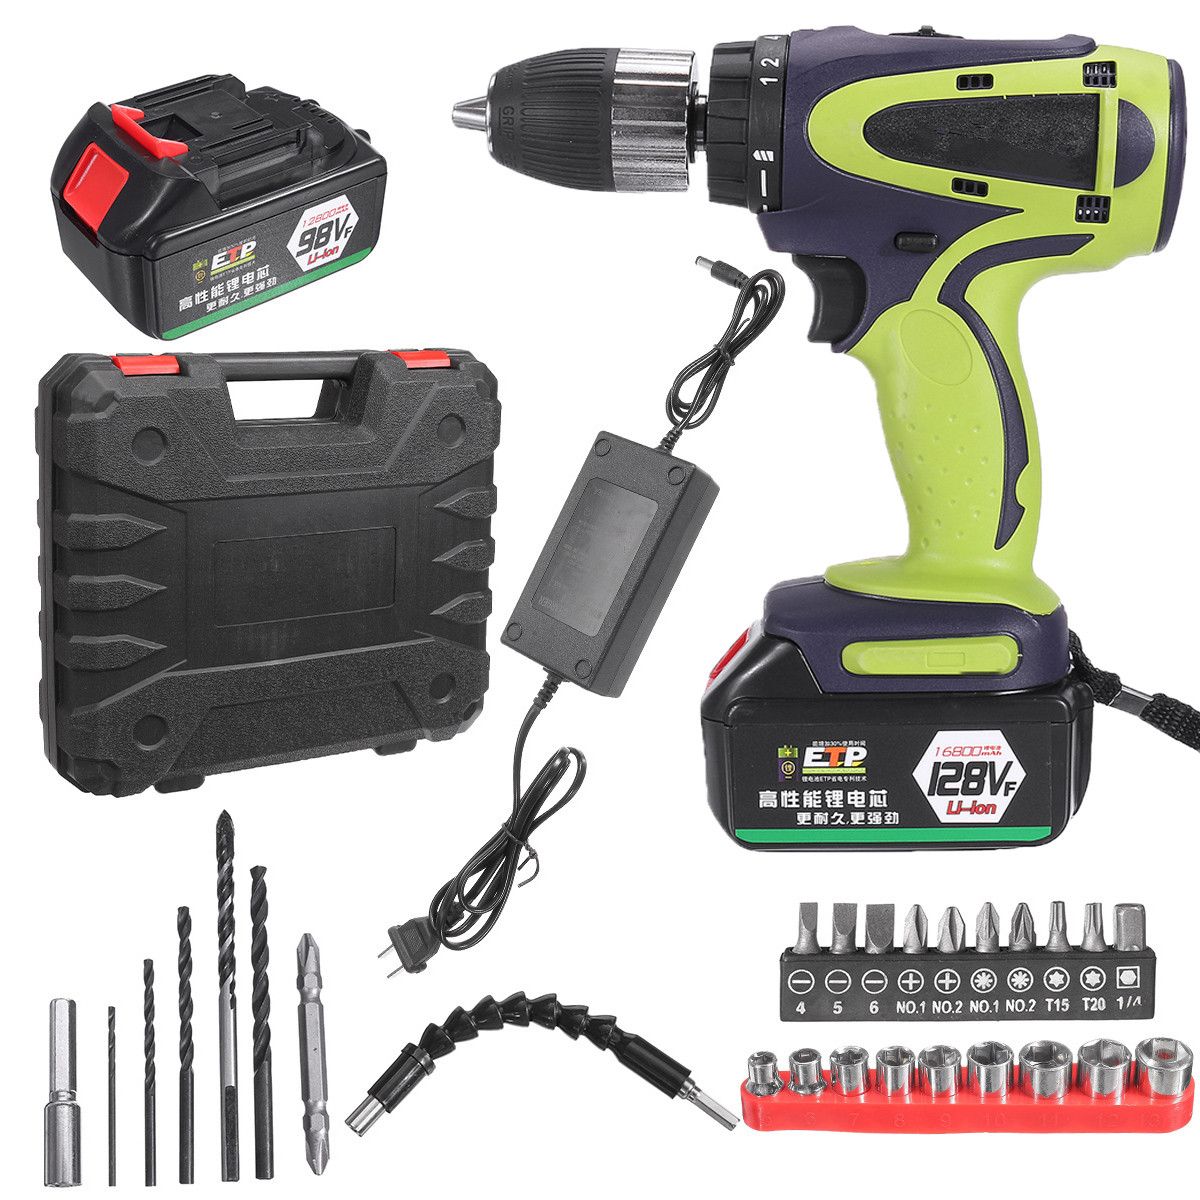 98128168-VF-13MM-Electric-Impact-Cordless-Drill-Lithium-Battery-Wireless-Hand-Drills-Tool-Sets-1682239